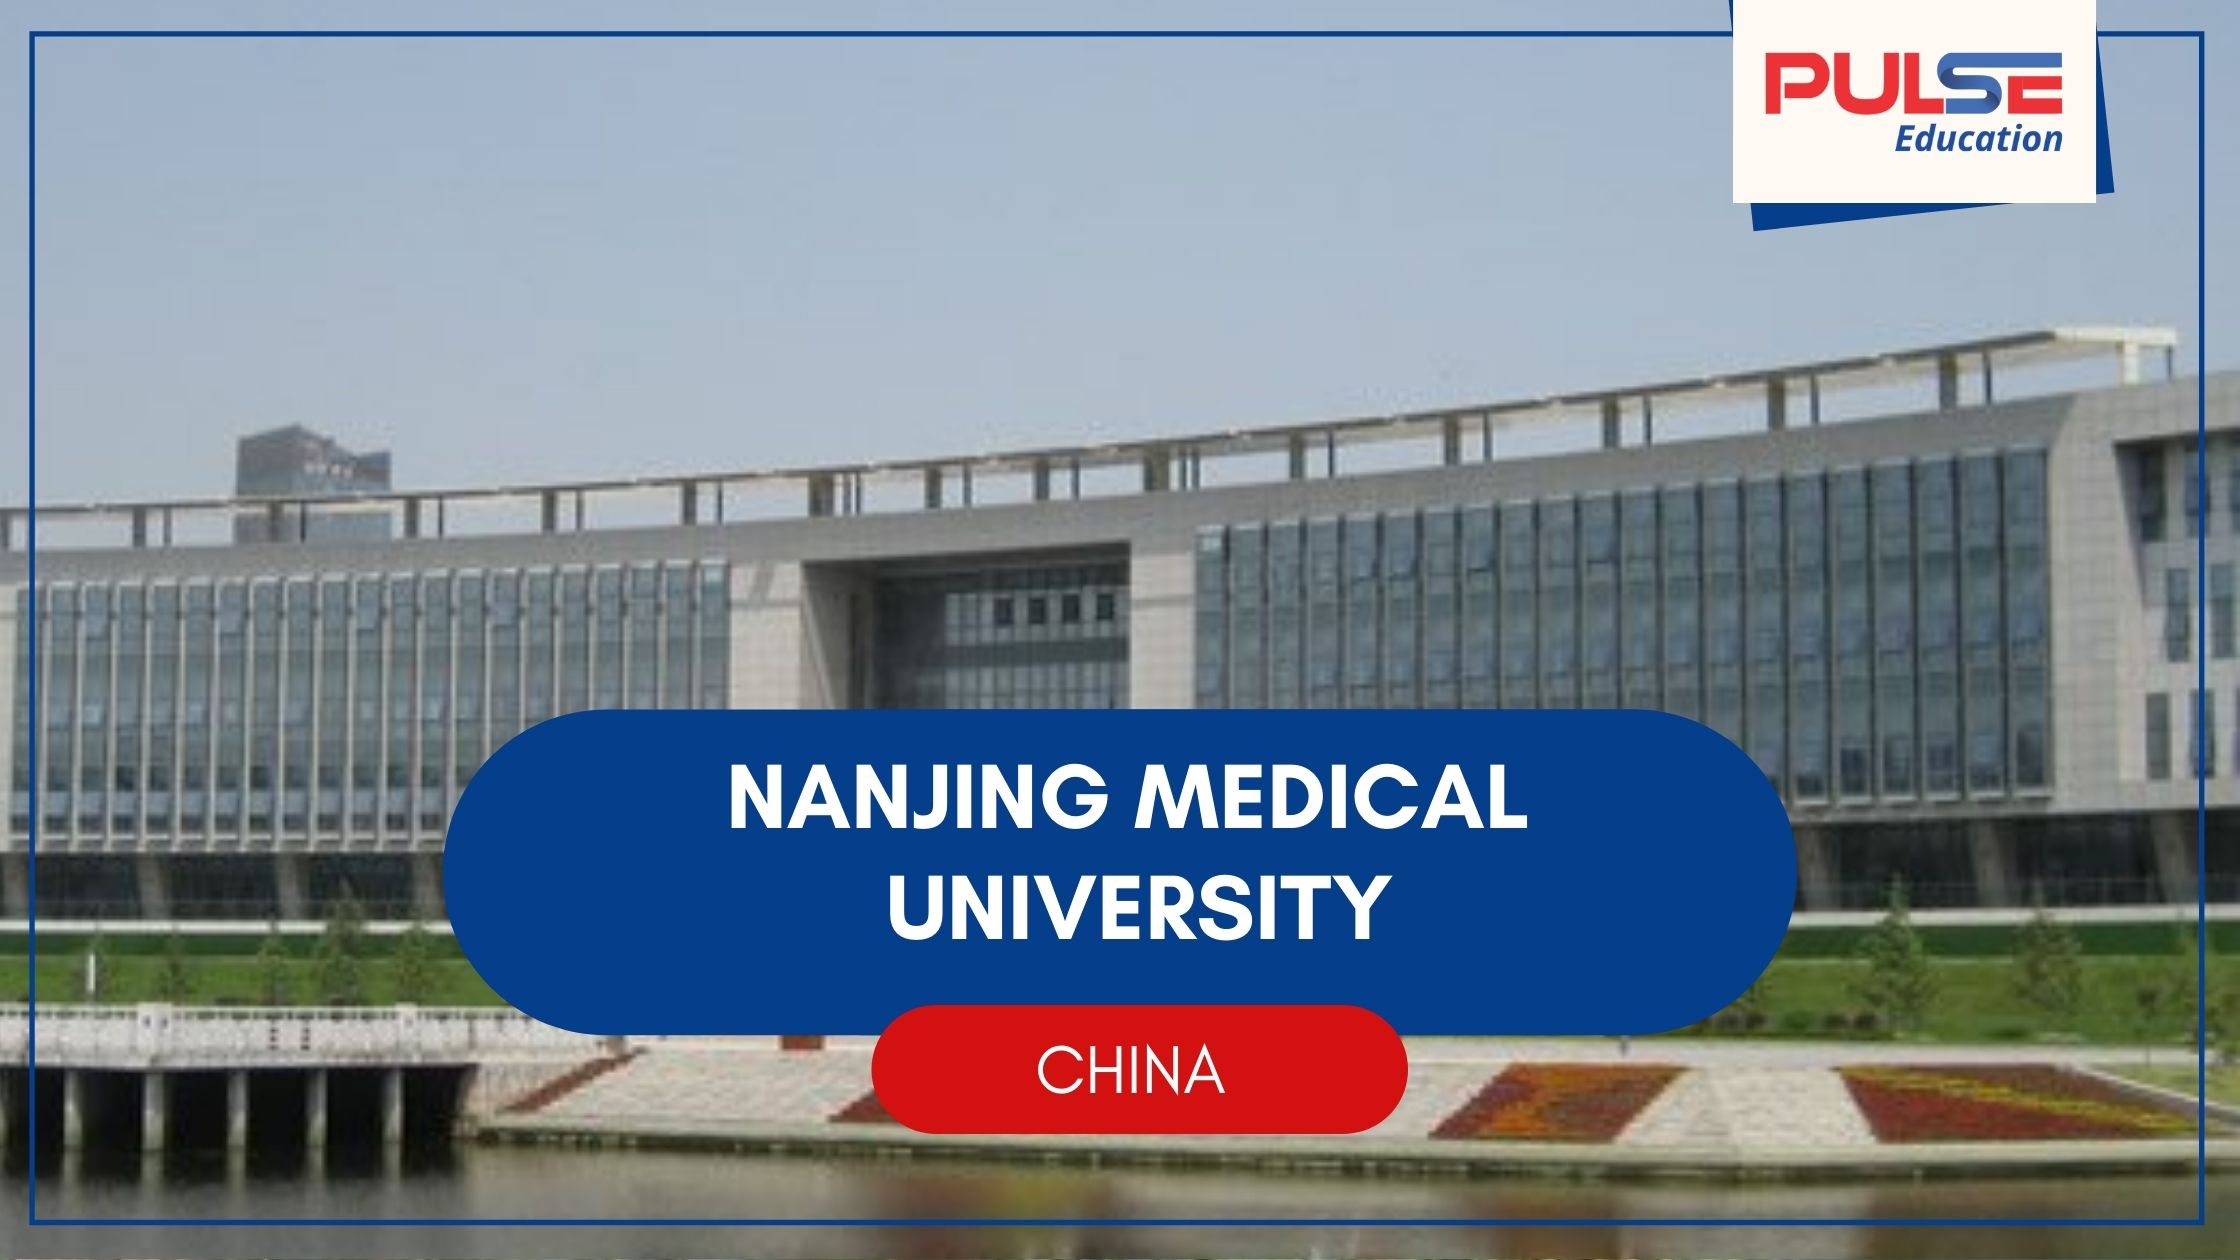 How can I get admission in Nanjing Medical University?